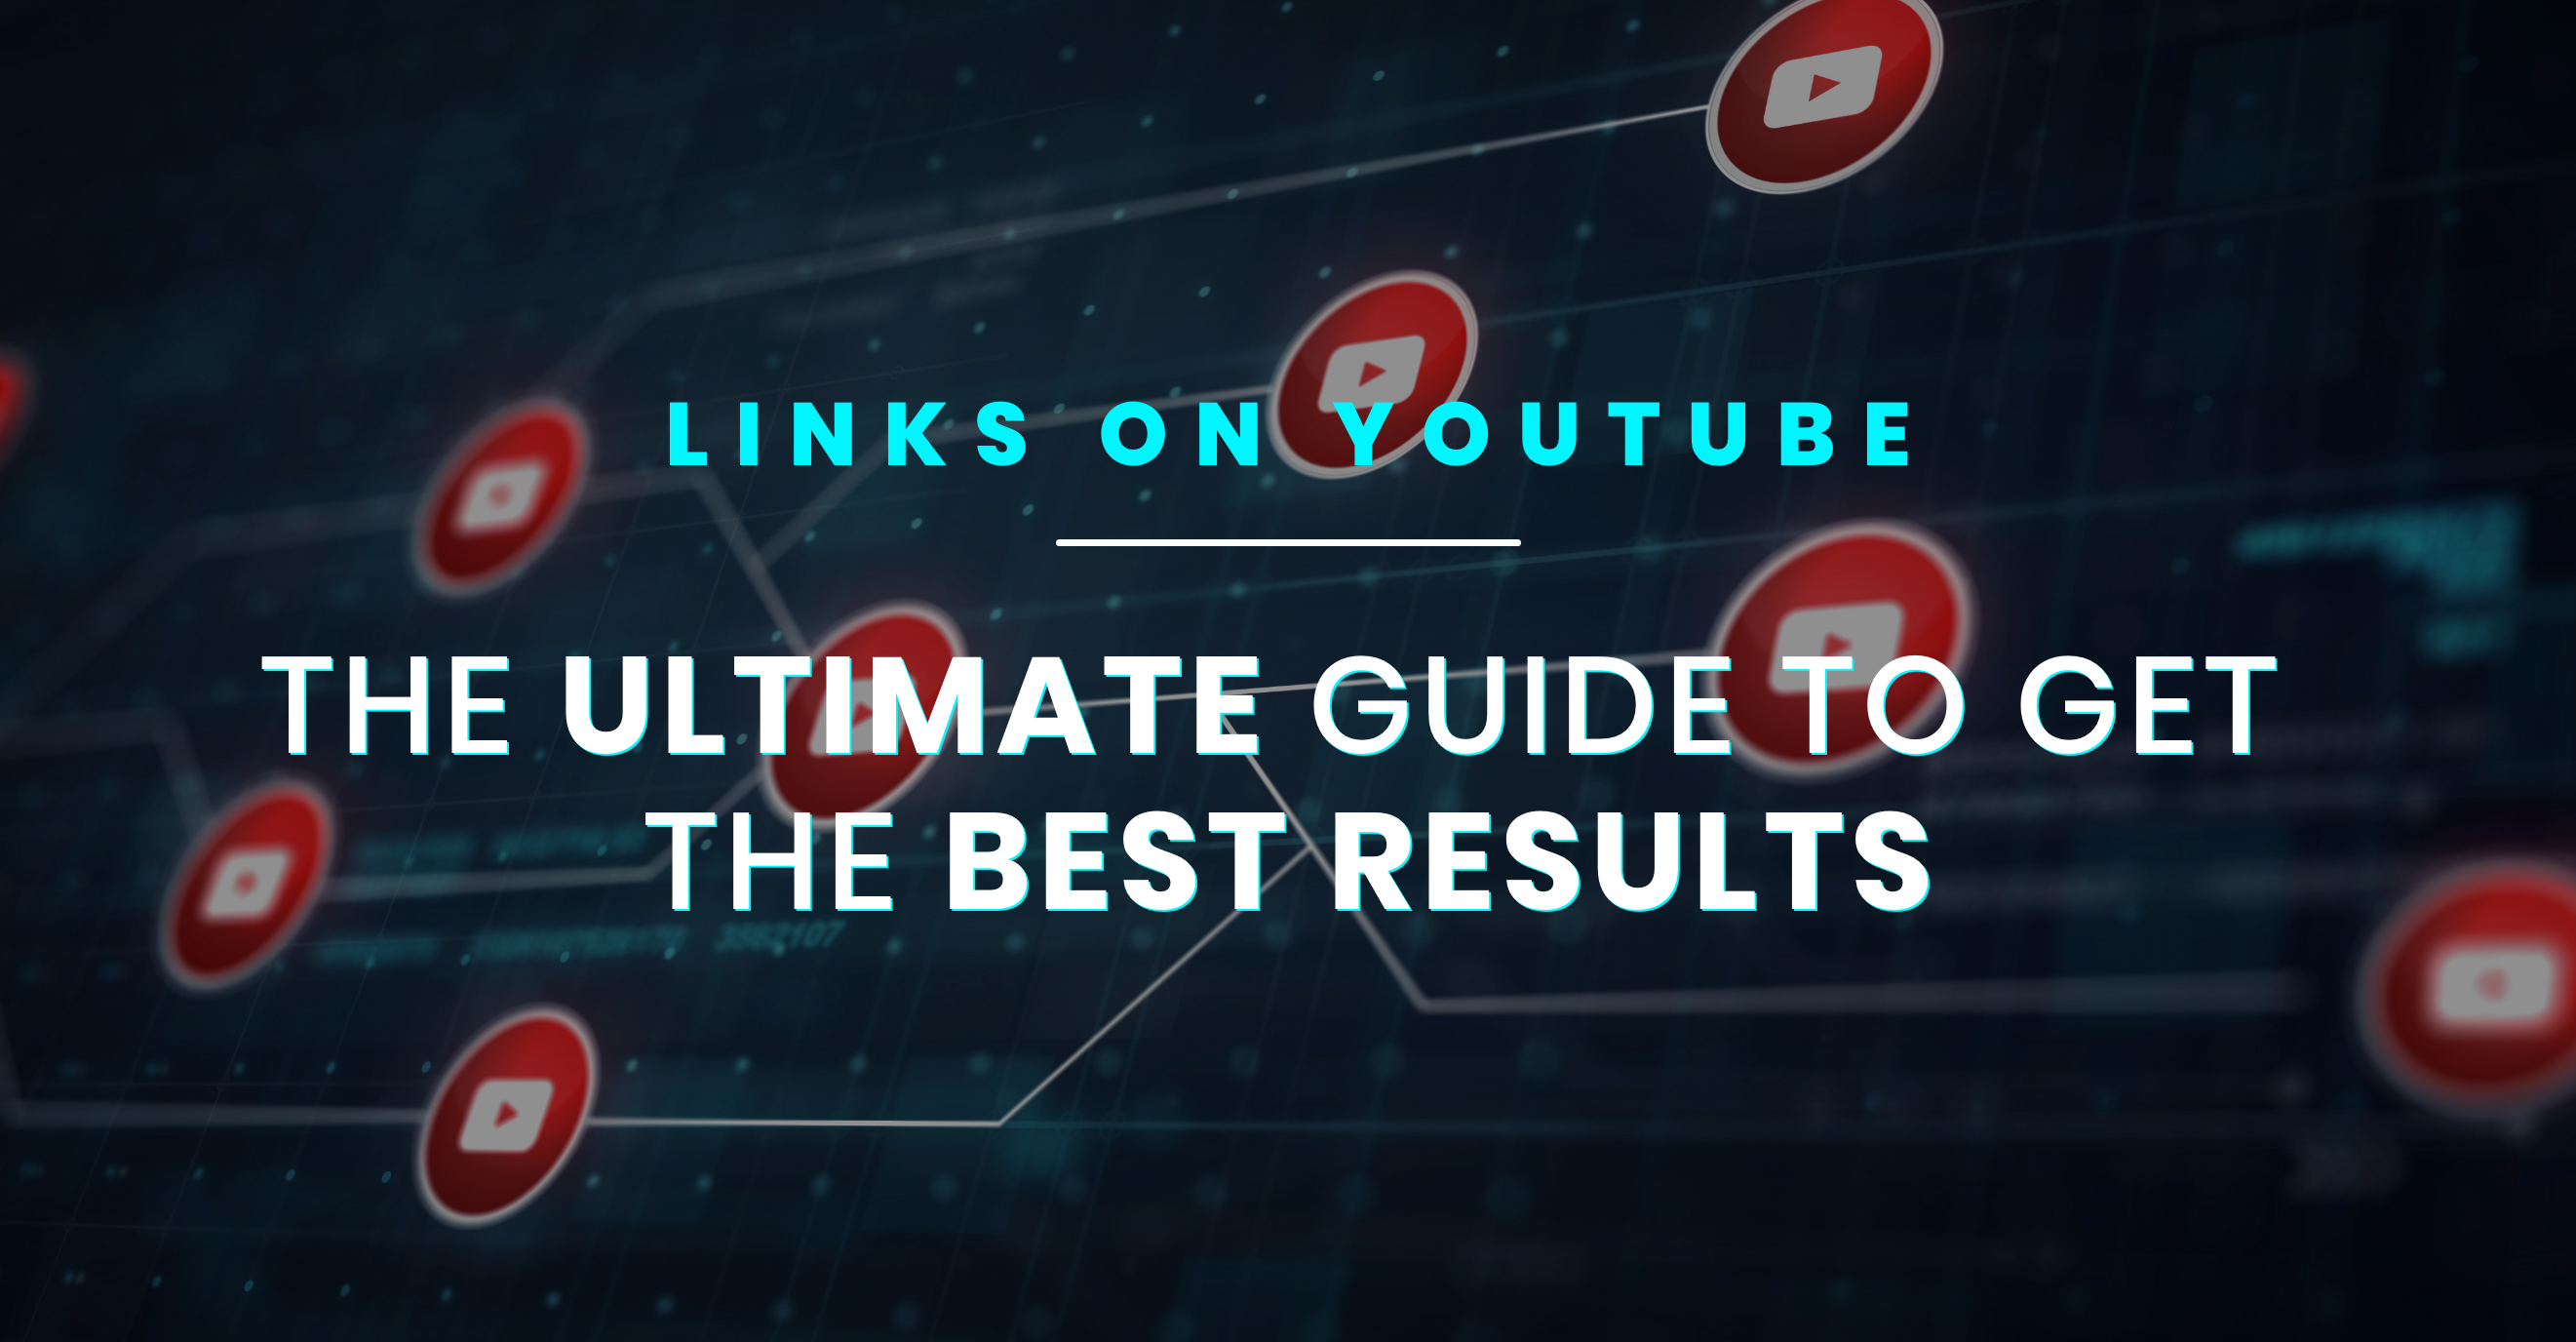 Links on Youtube – The ultimate guide to getting the best results